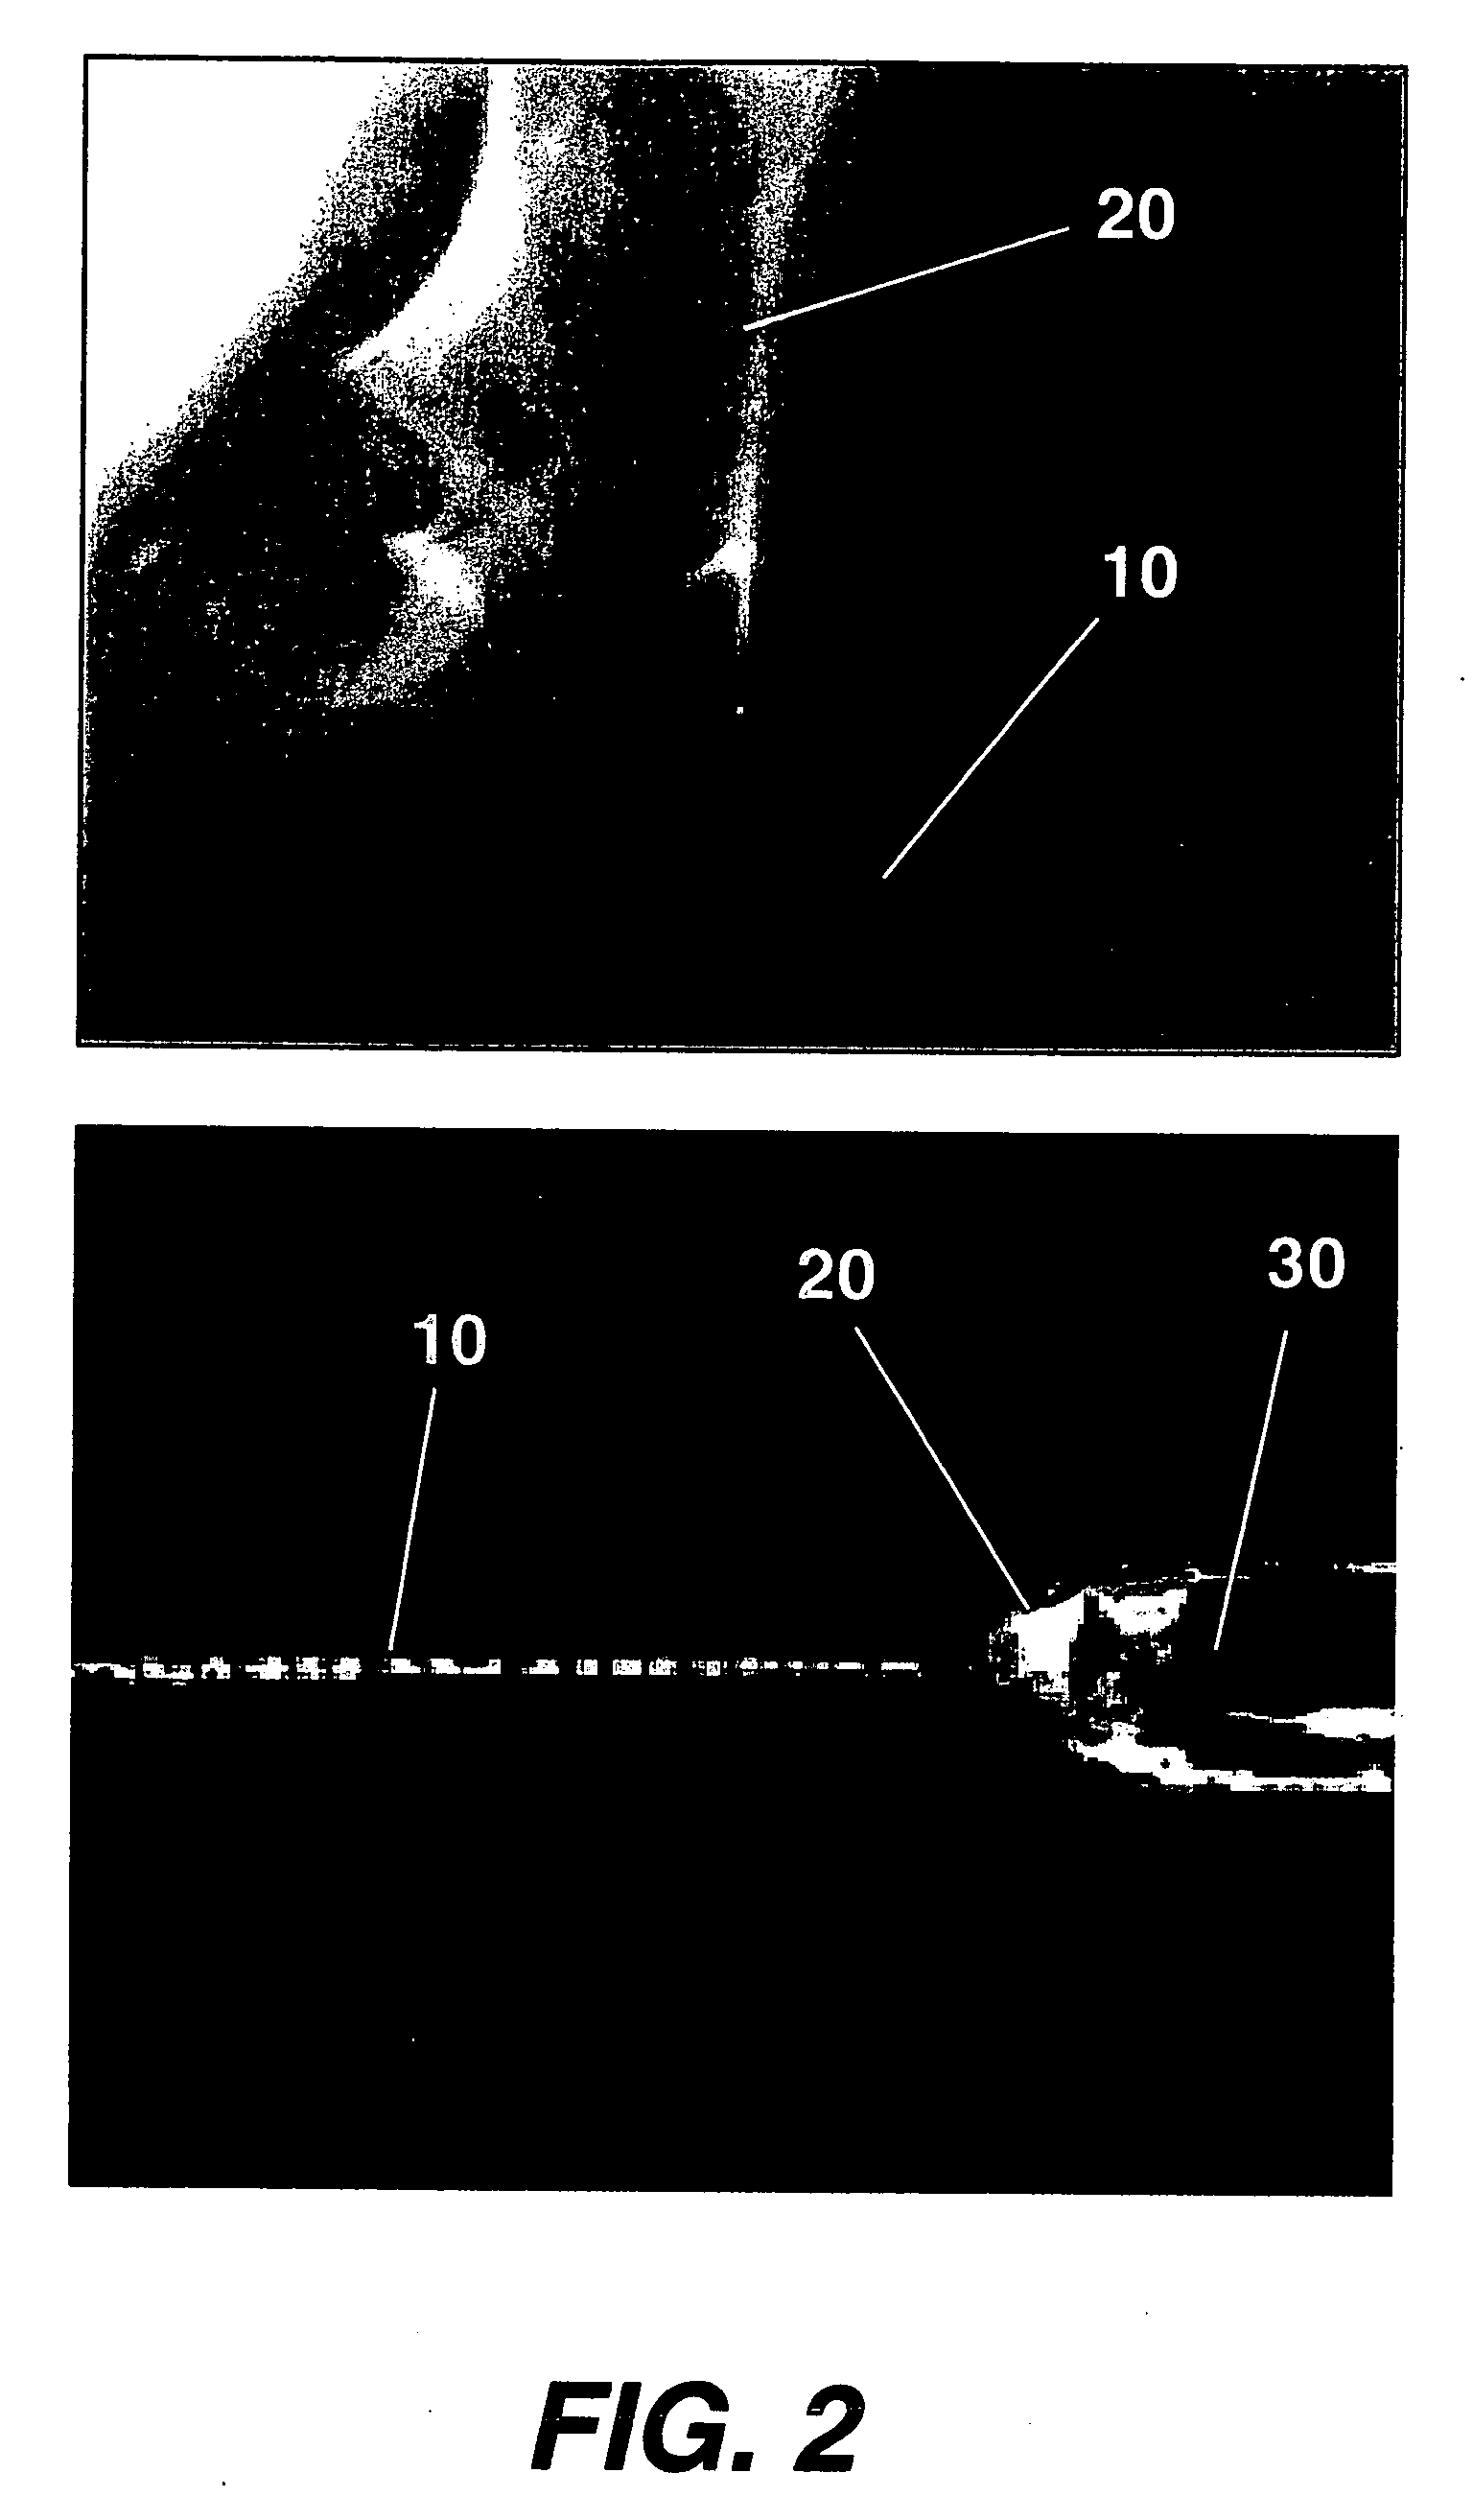 Method for stromal corneal repair and refractive alteration